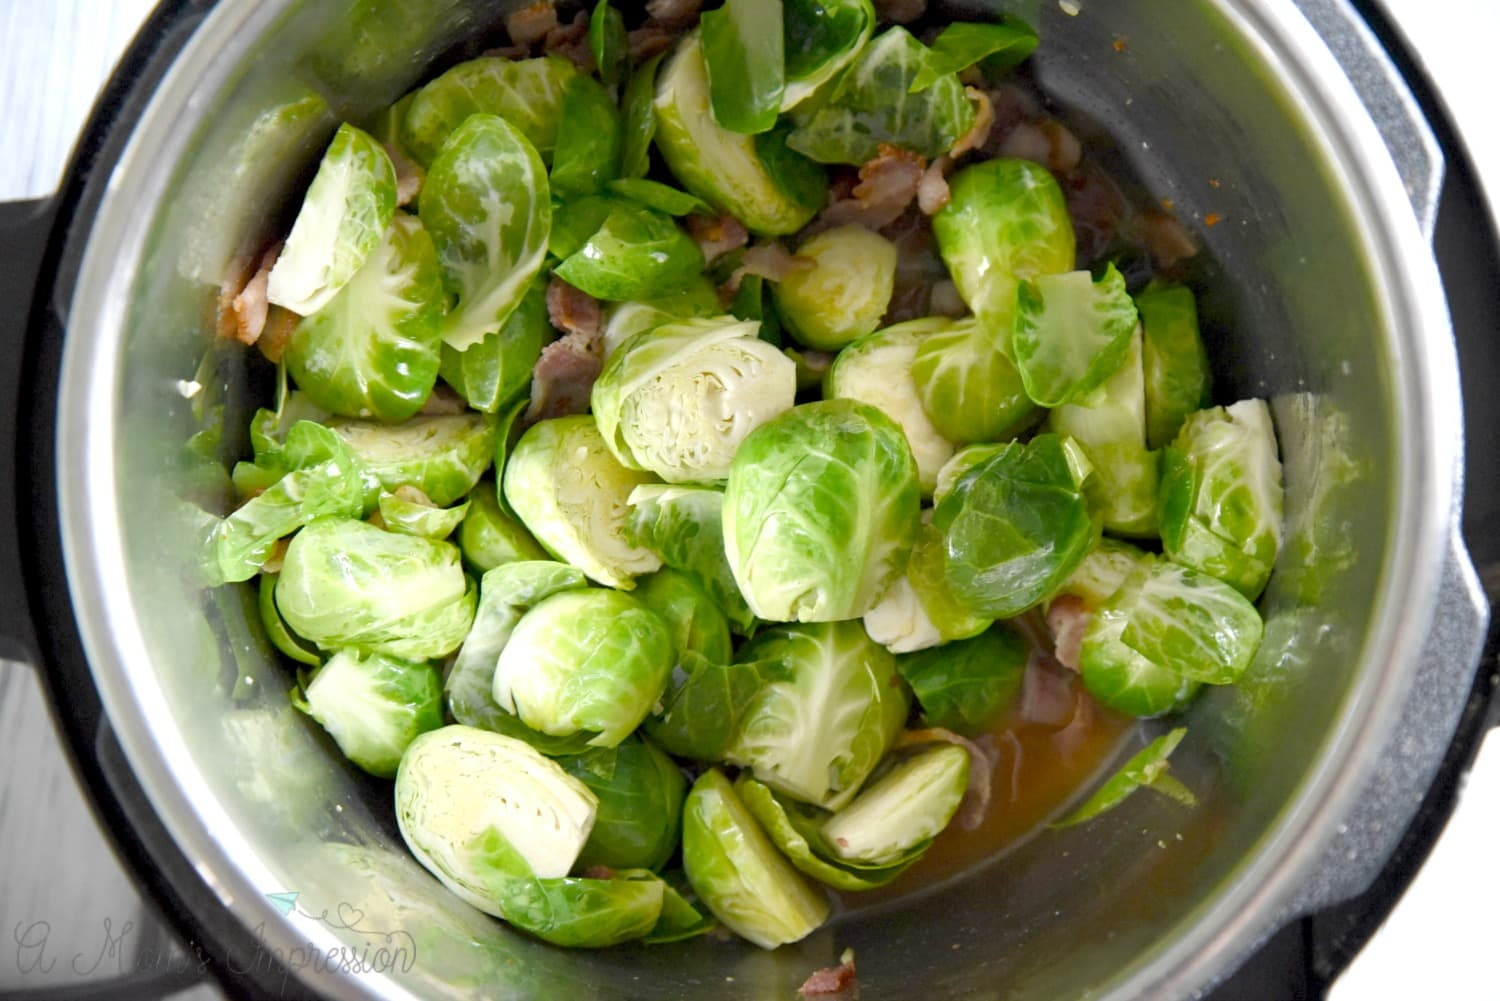 Instant Pot Brussels Sprouts
 Instant Pot Brussels Sprouts with Bacon and Balsamic Glaze